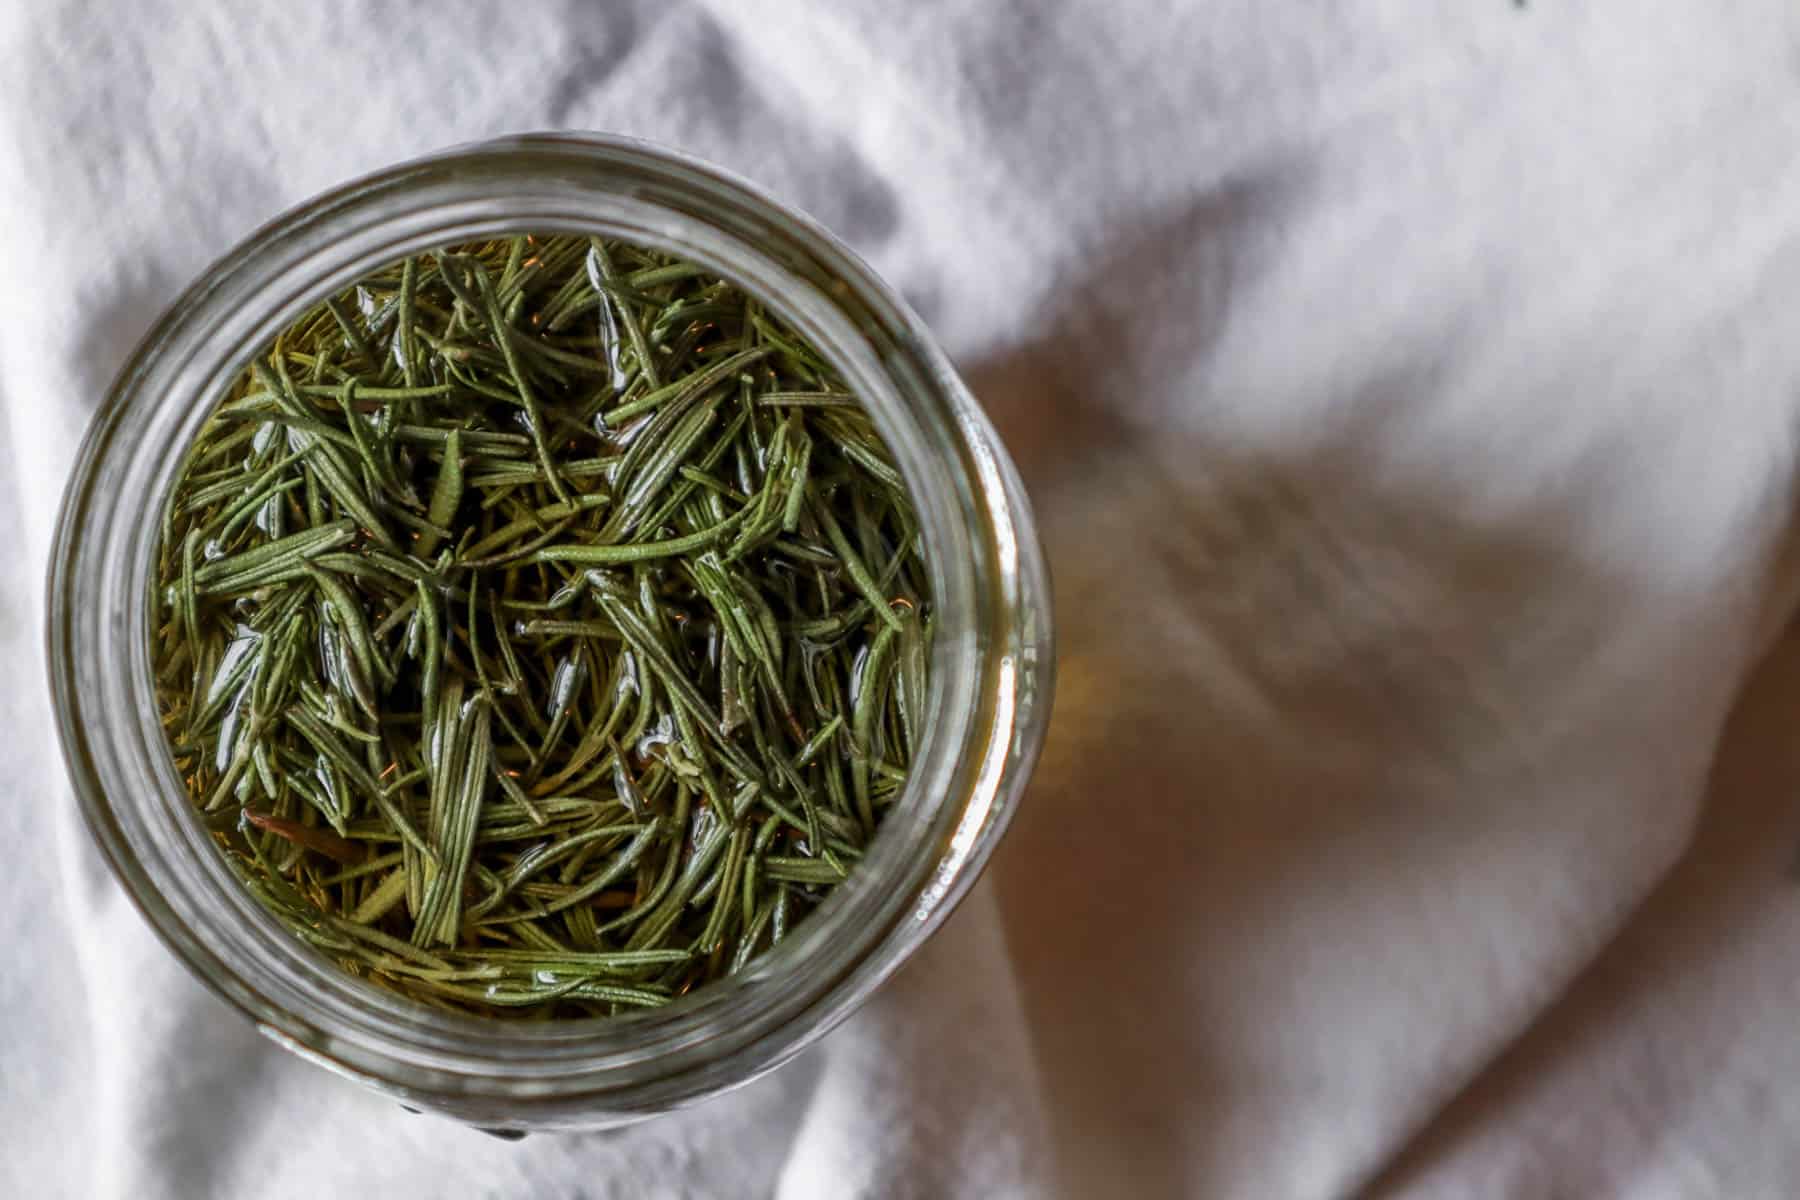 A jar of rosemary oil infusing